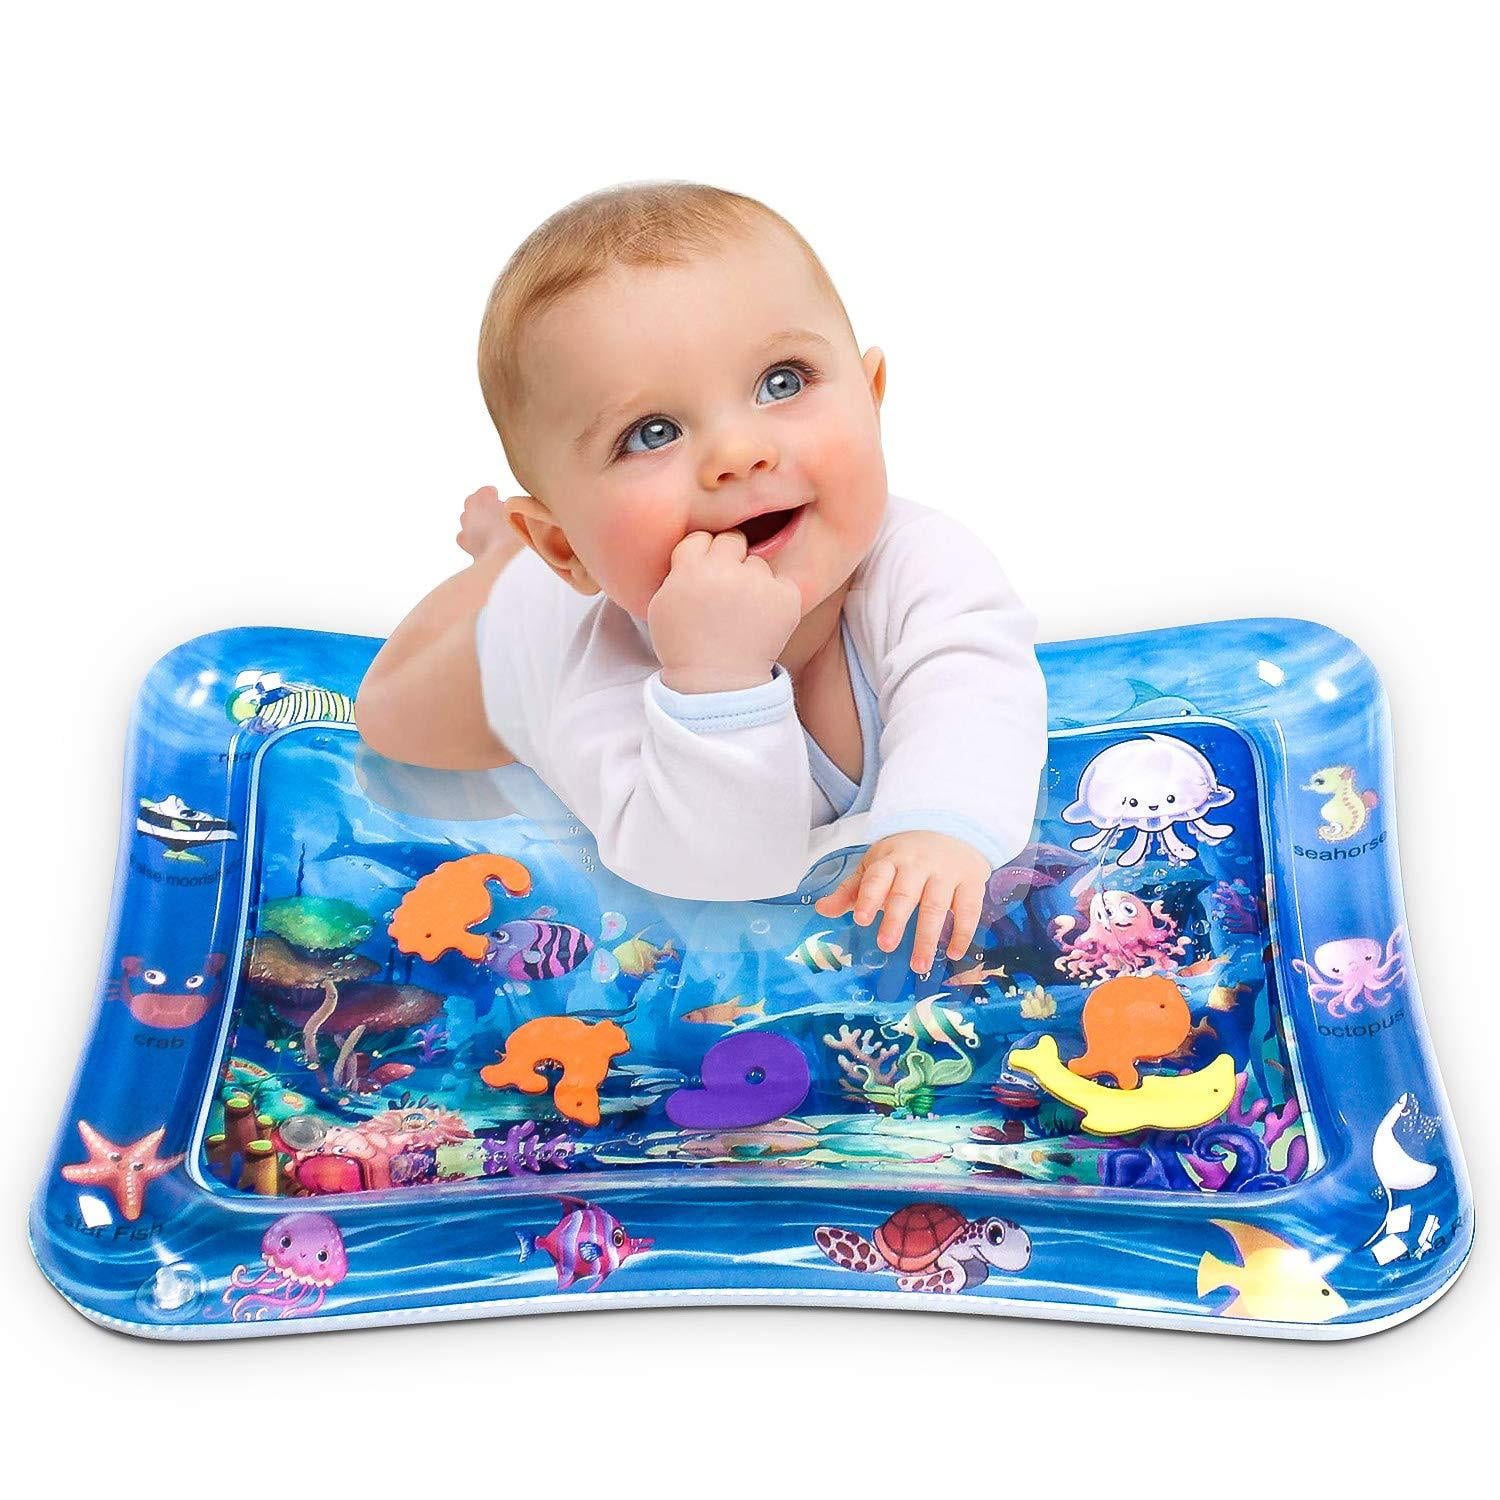 Blue JUYOO Inflatable Play Mat Water Mat Baby Tummy Time for Kids Toddlers Infant Tummy Time Play Activity Center Toy for Baby’s Stimulation Growth 